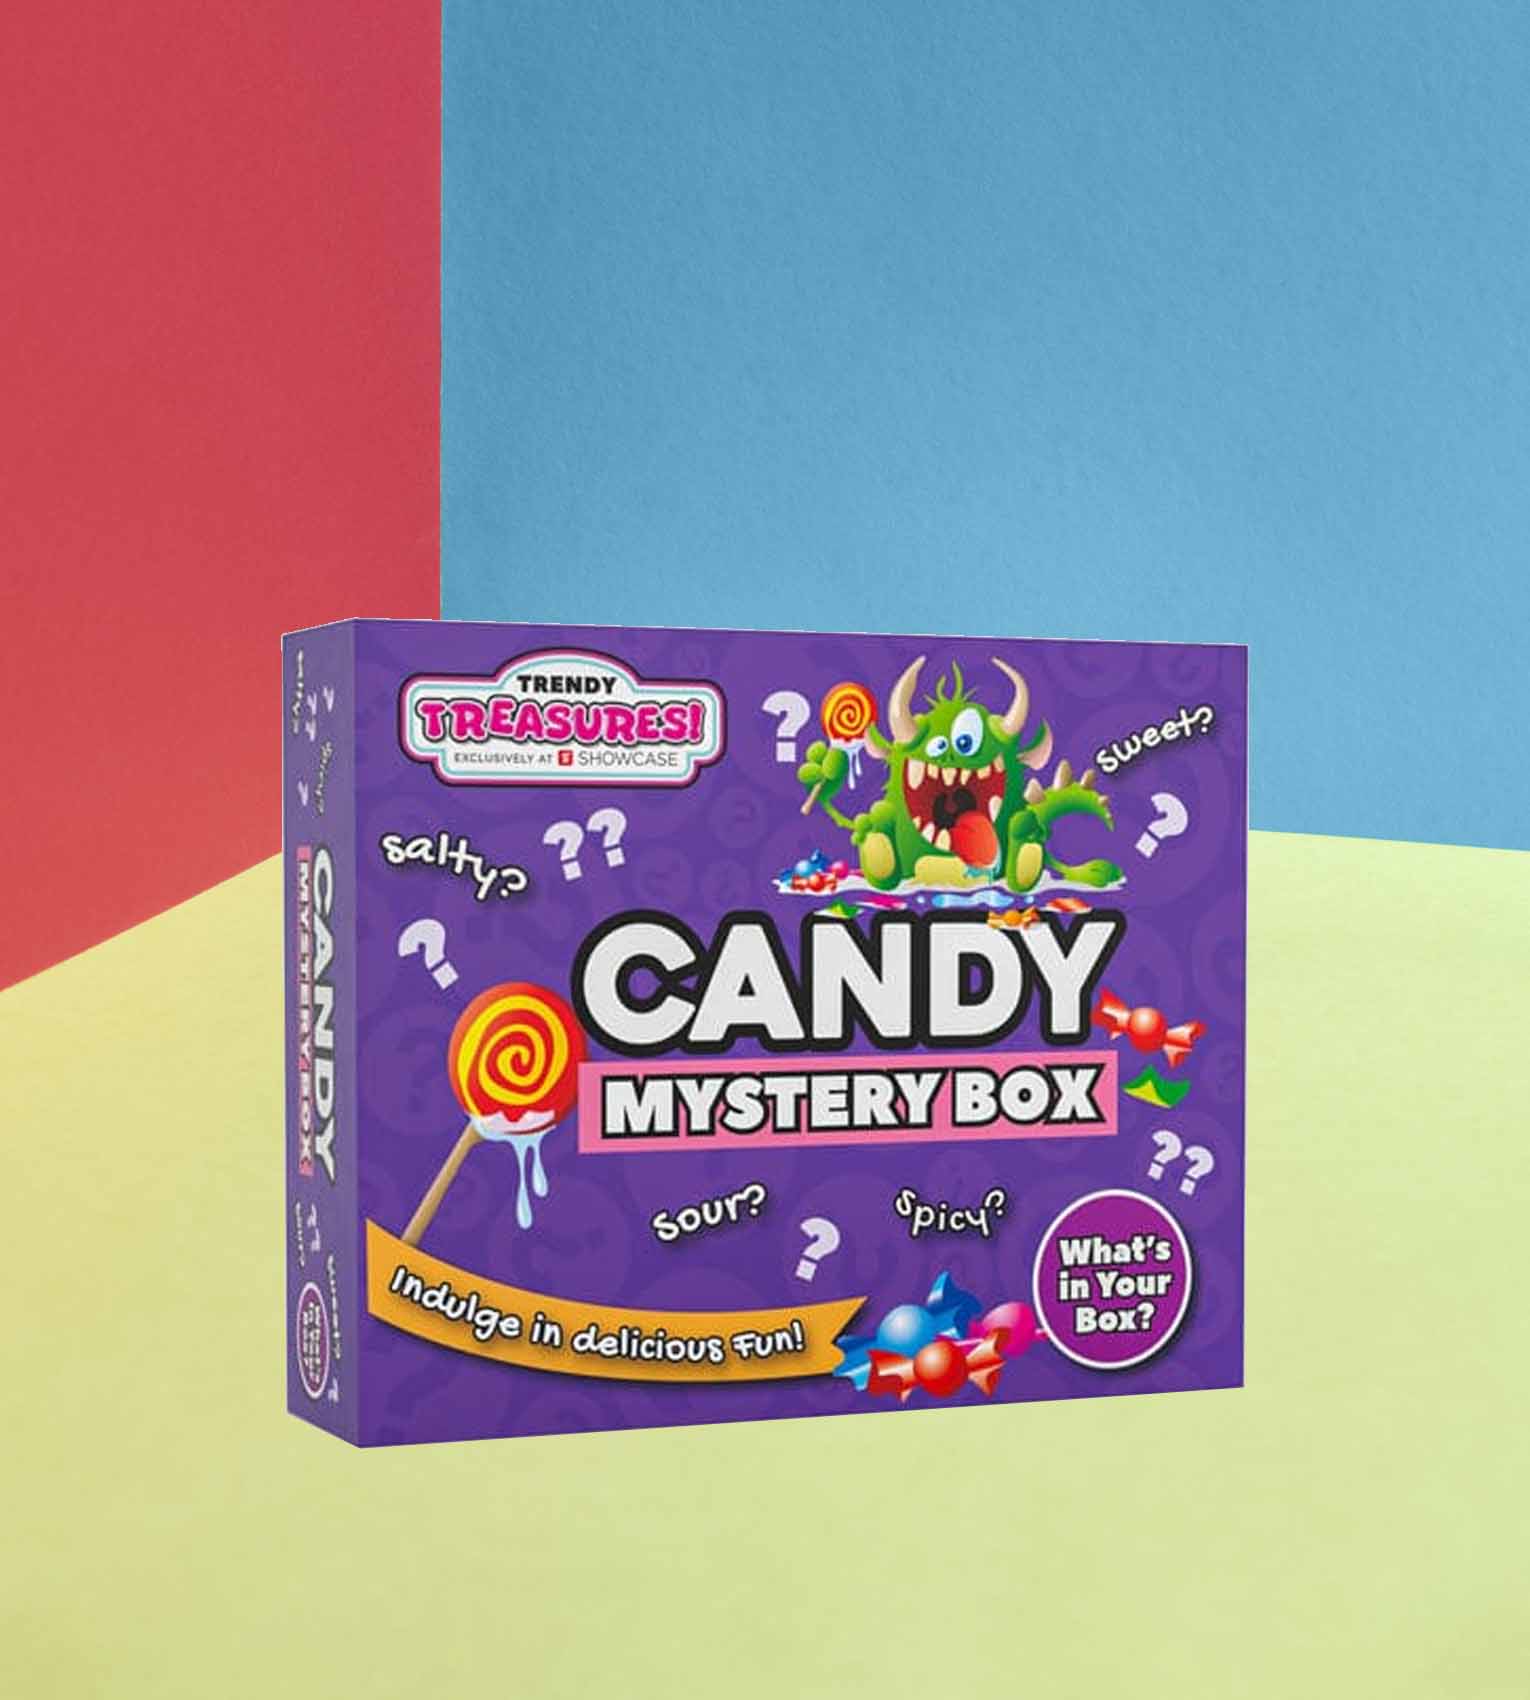 Candy Packaging 